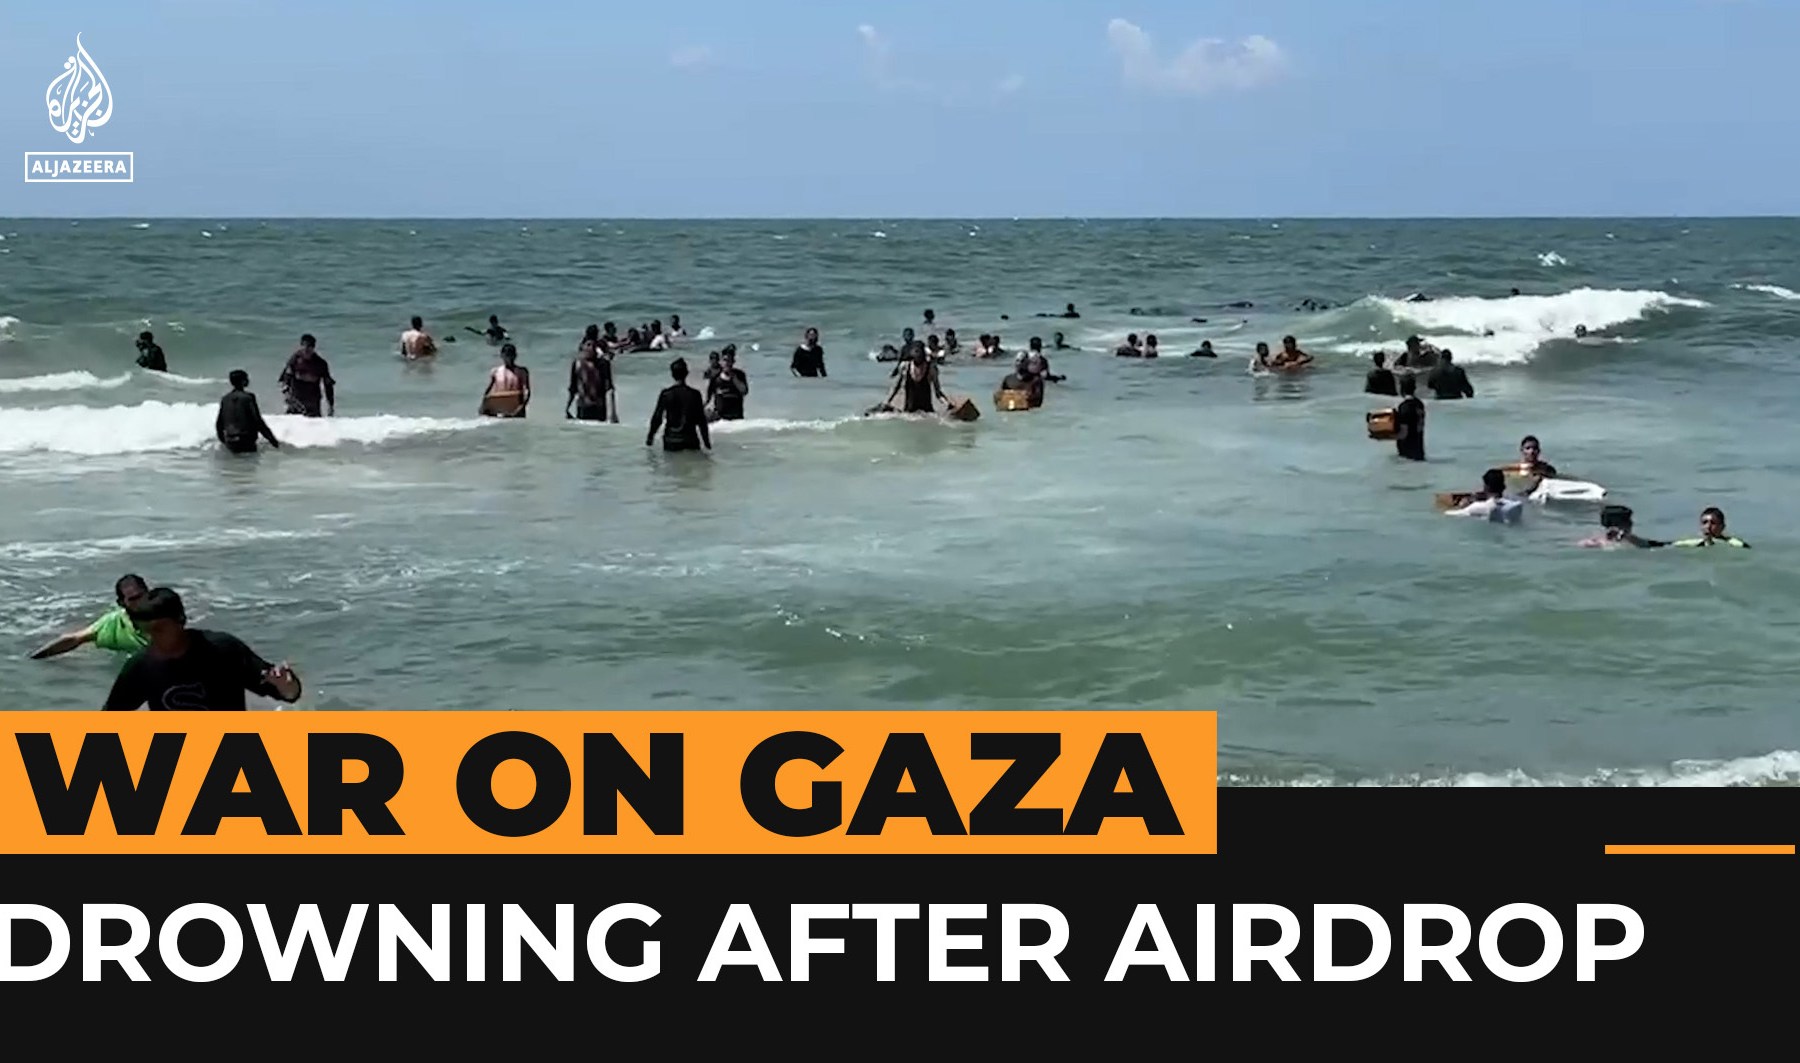 In Gaza, Palestinians drown in desperate attempt to get aid dropped in sea